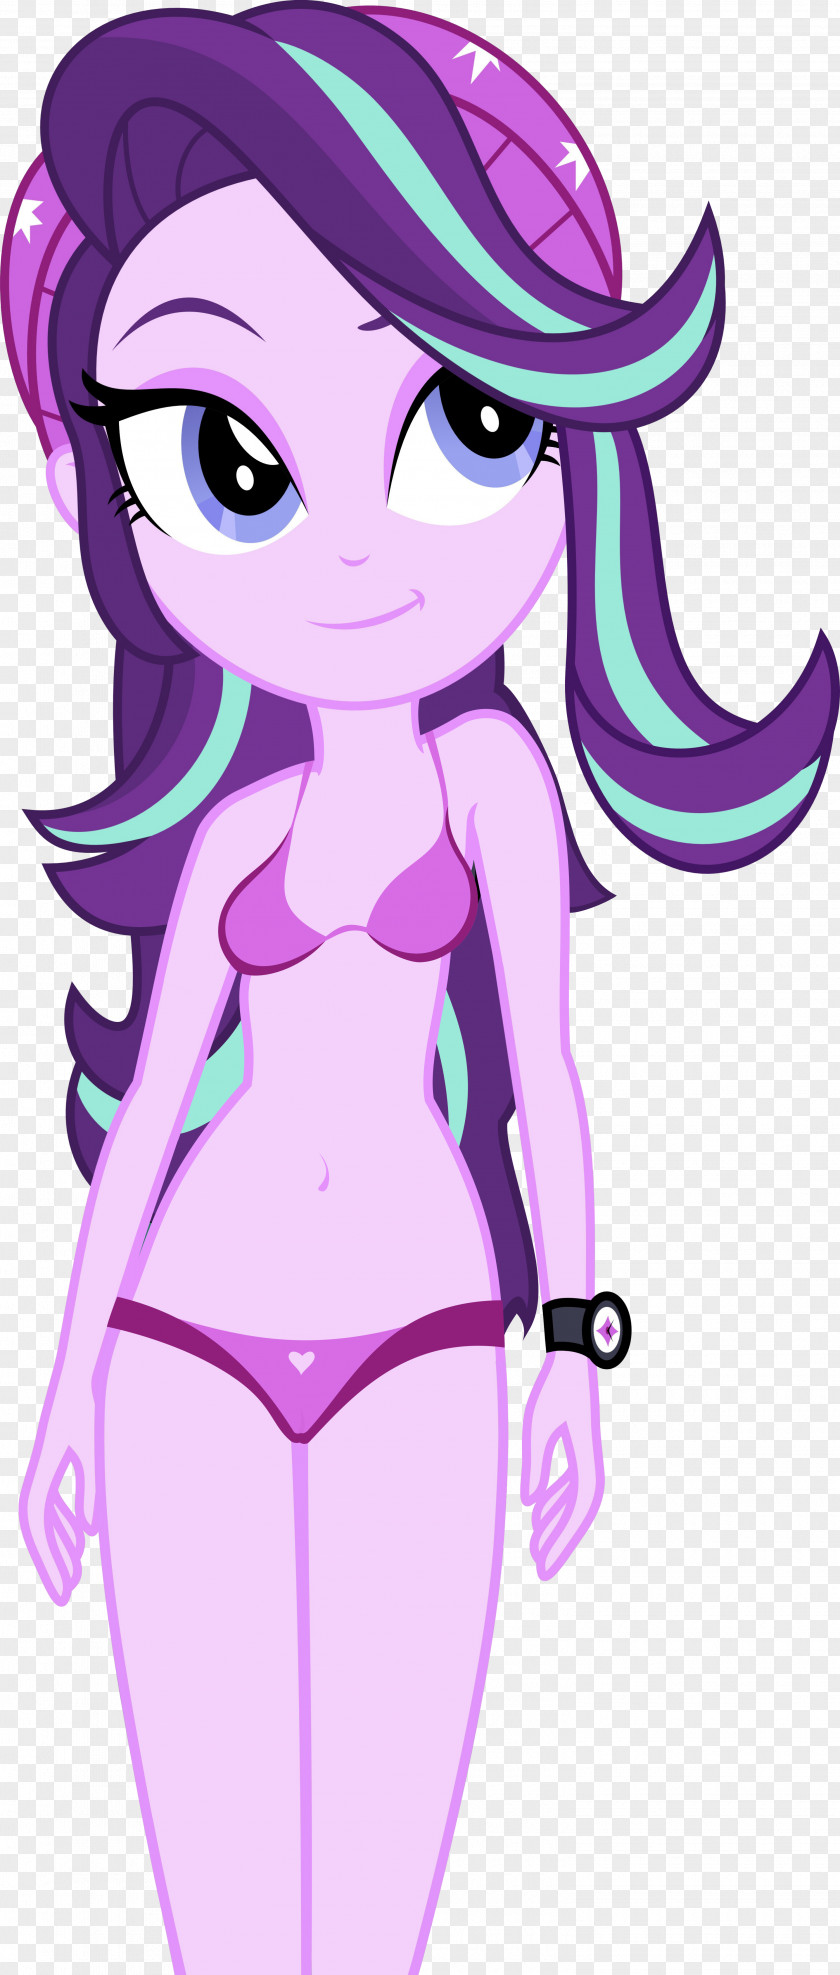 Belly Button Outie Pony Twilight Sparkle Rarity Pinkie Pie Rainbow Dash PNG